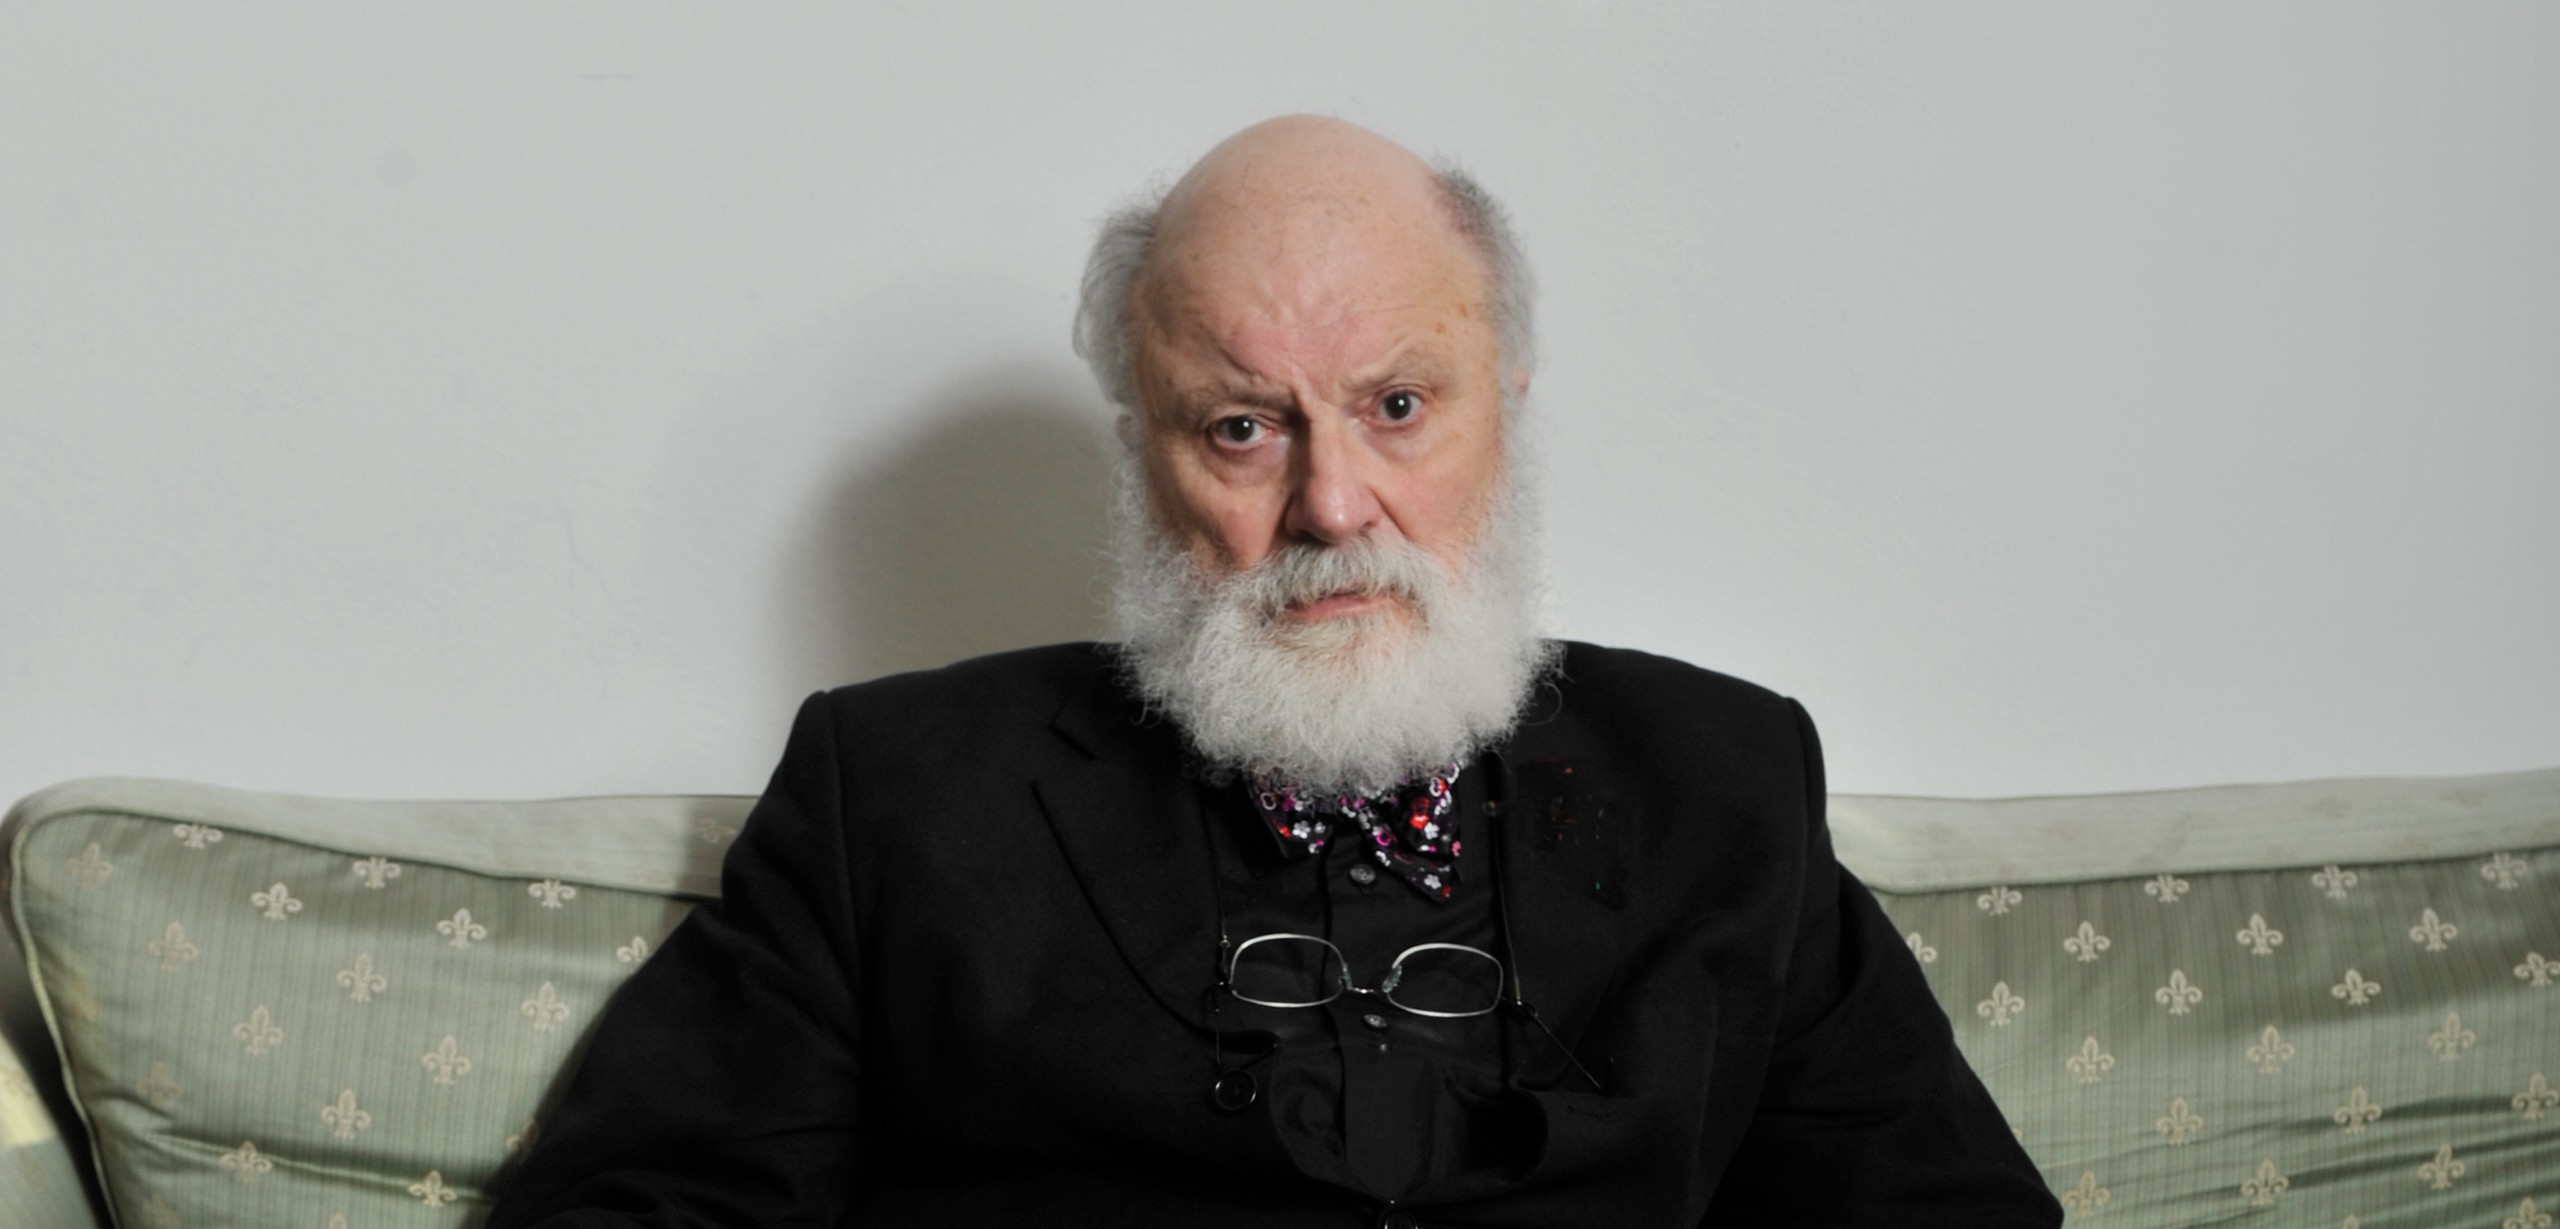 “The battle it was born to lose”: the poetry of Geoffrey Hill